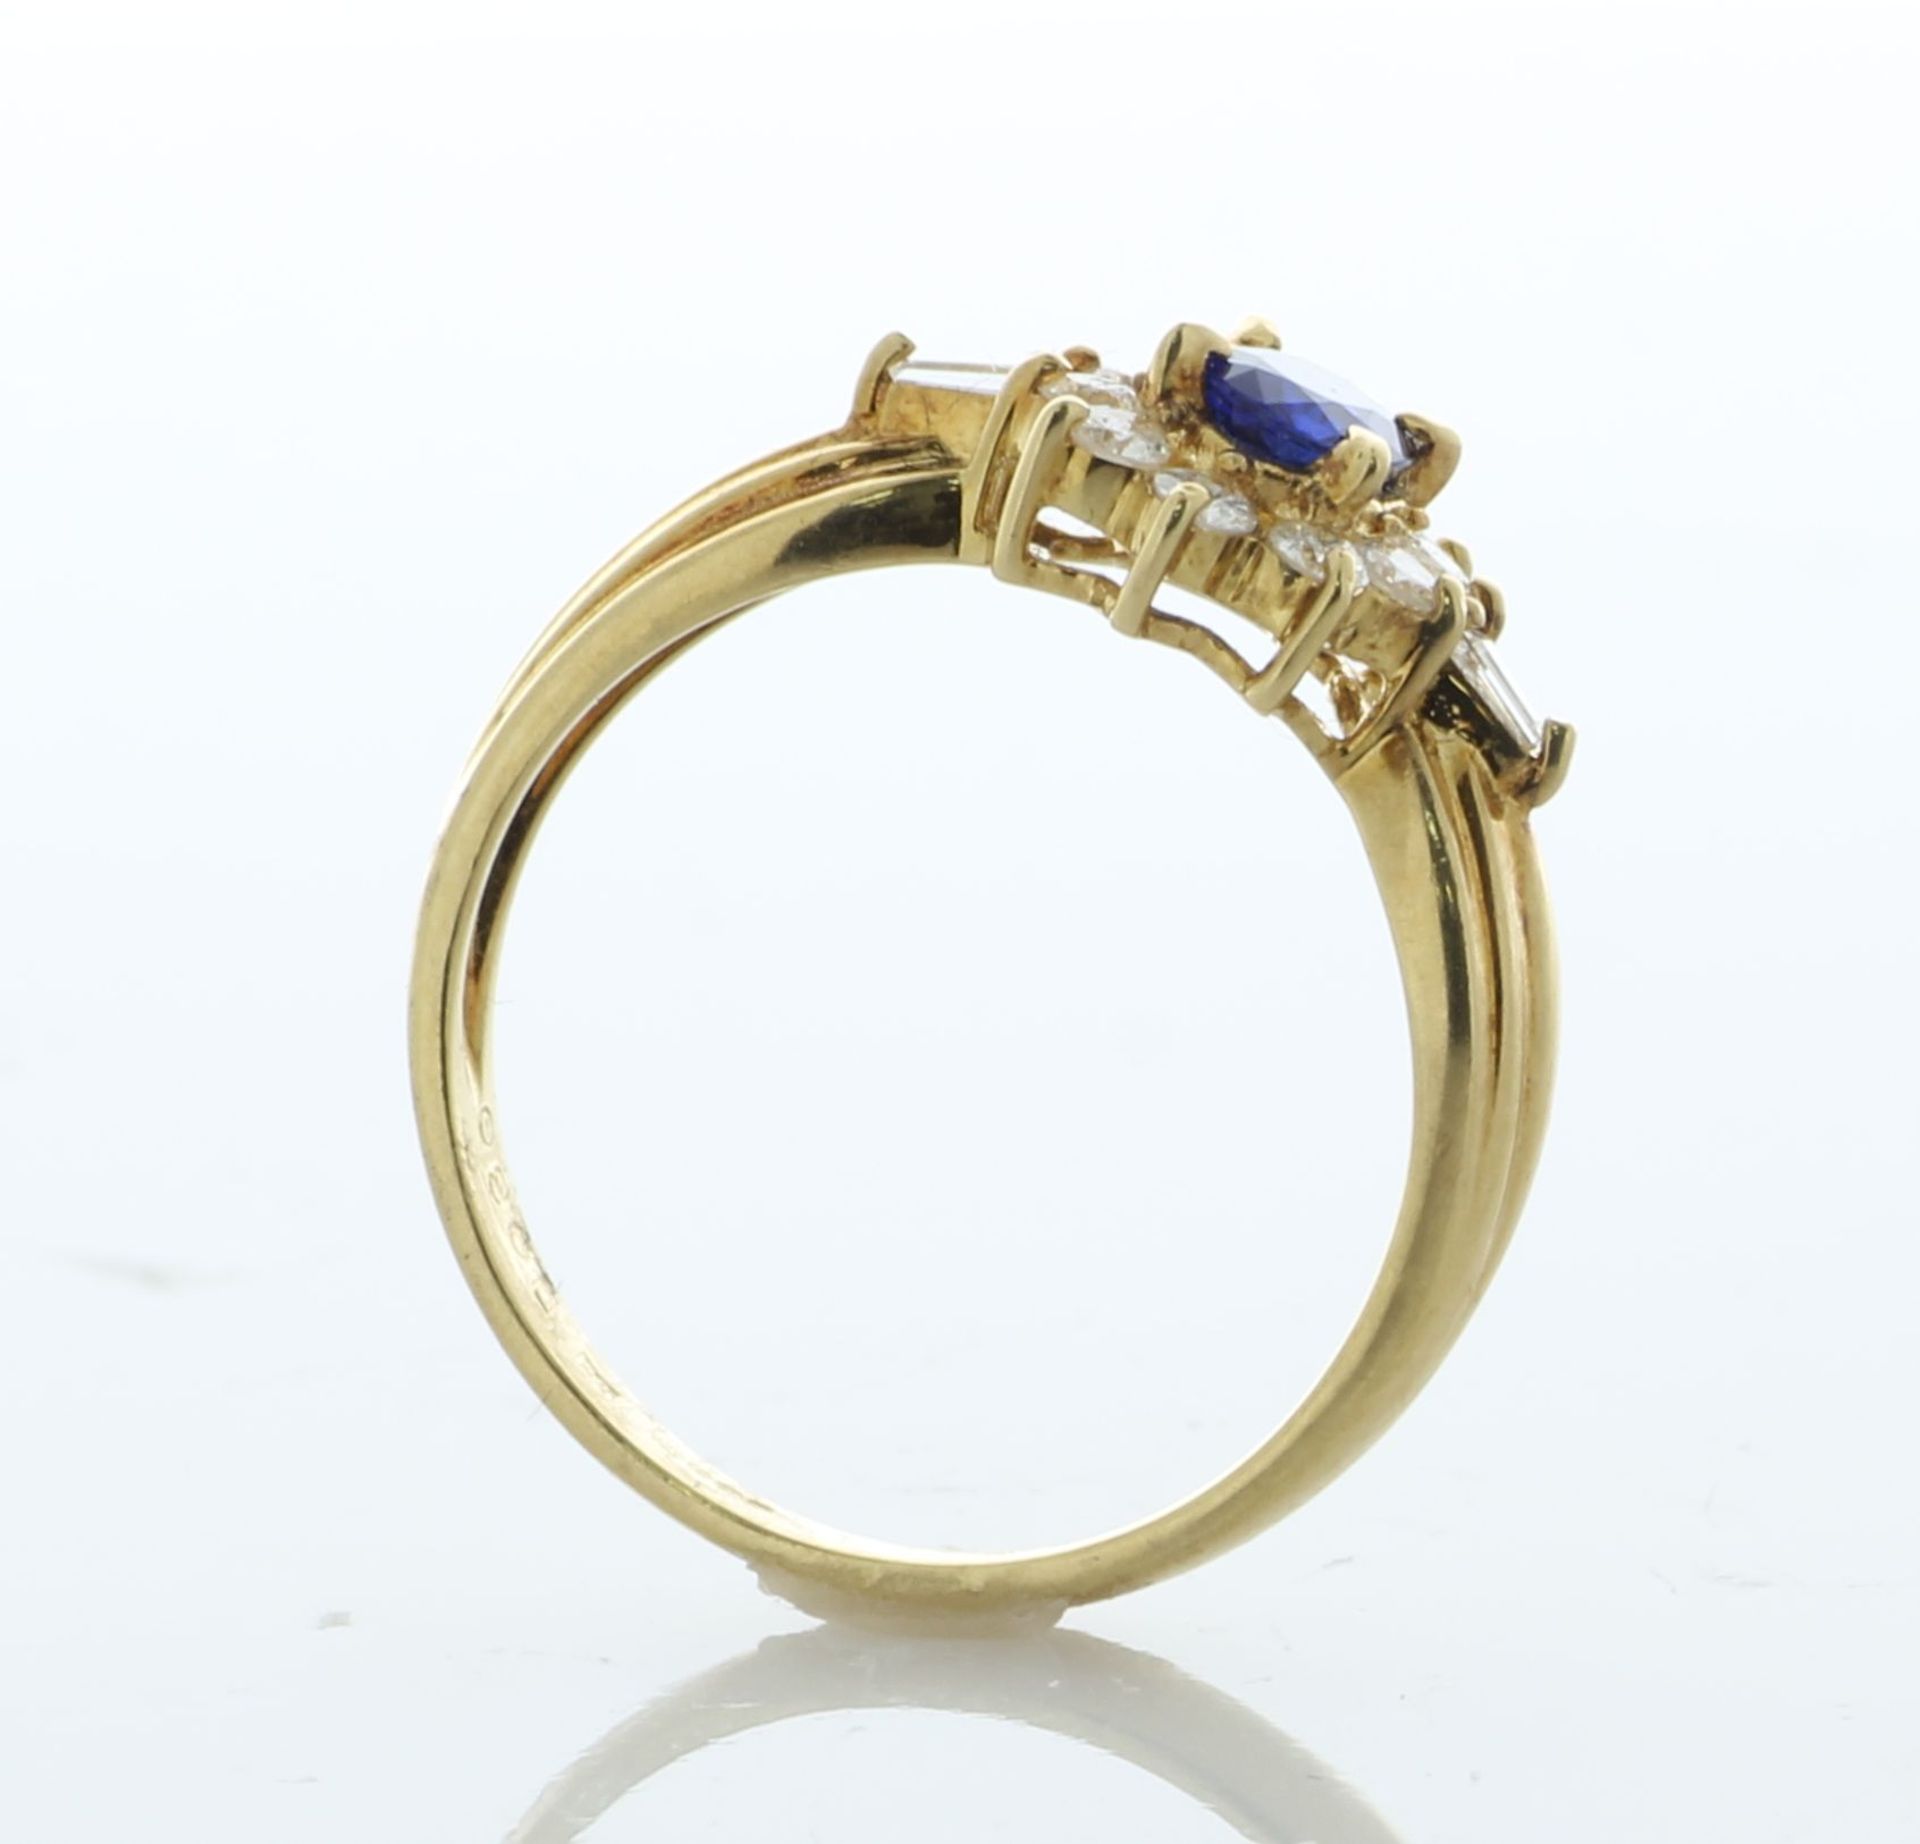 18ct Yellow Gold Oval Cut Sapphire And Diamond Ring (S0.45) 0.30 Carats - Valued By IDI £5,950.